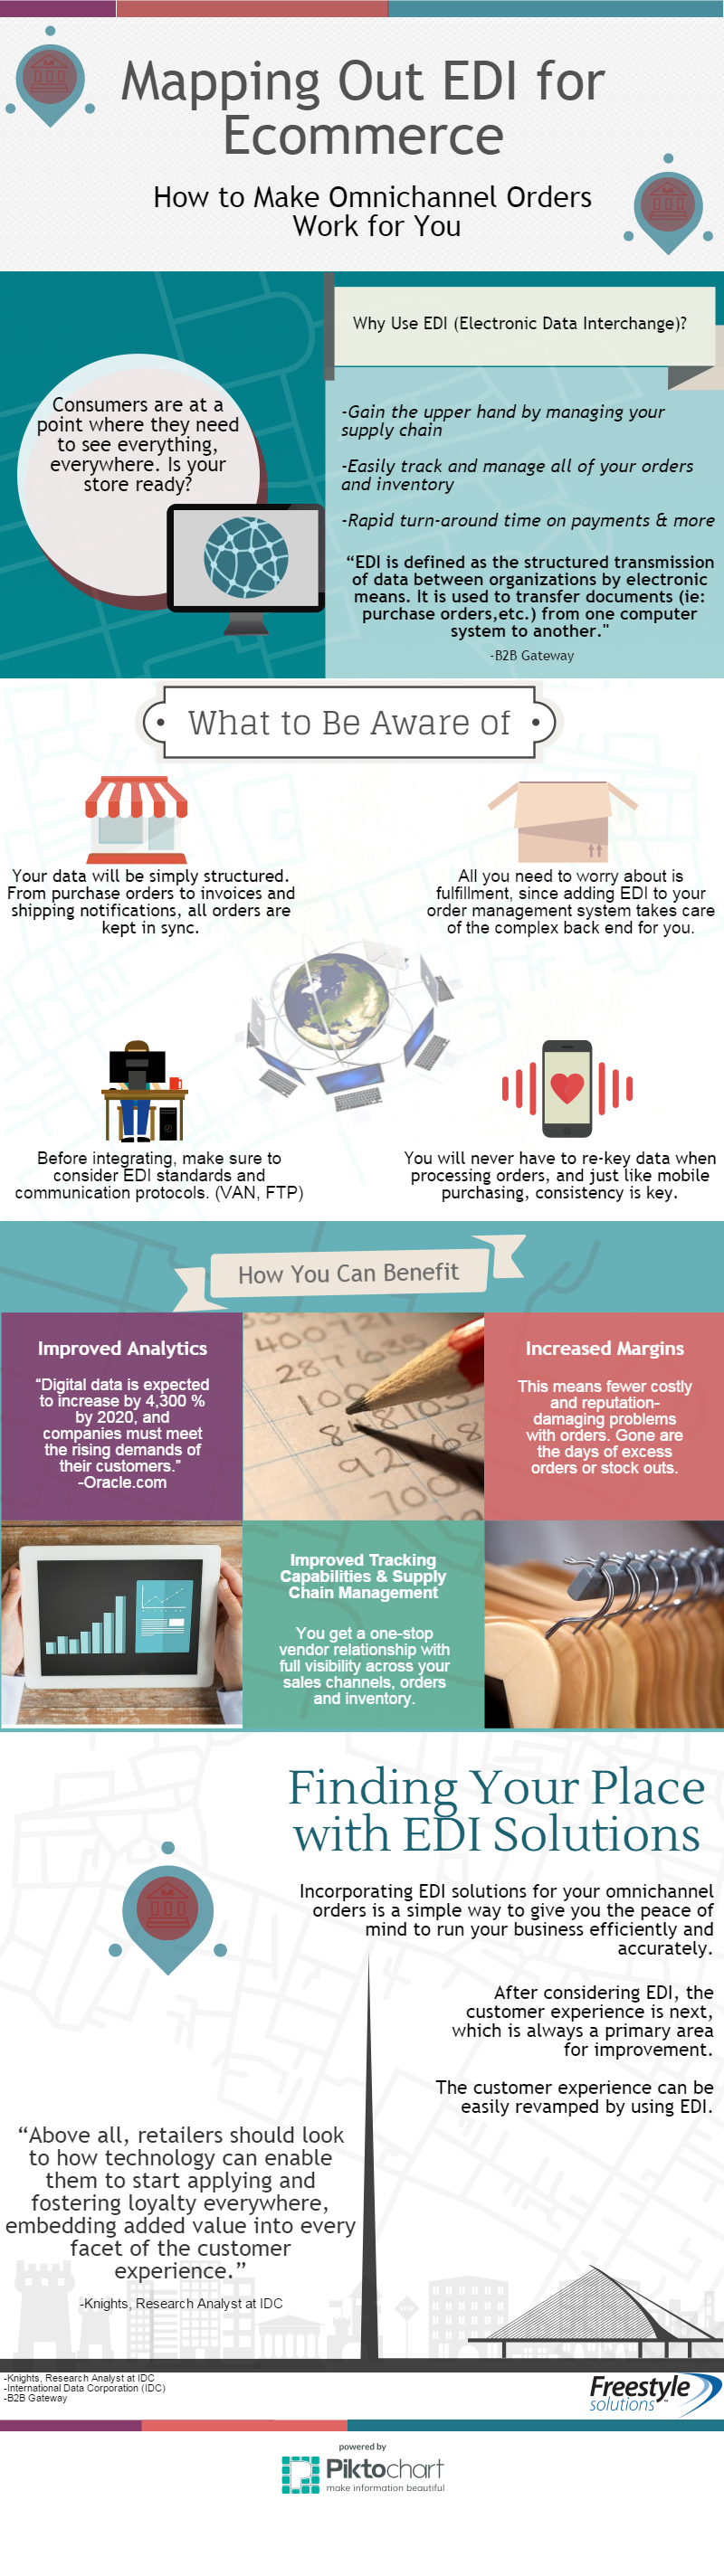 edi solutions for ecommerce infographic